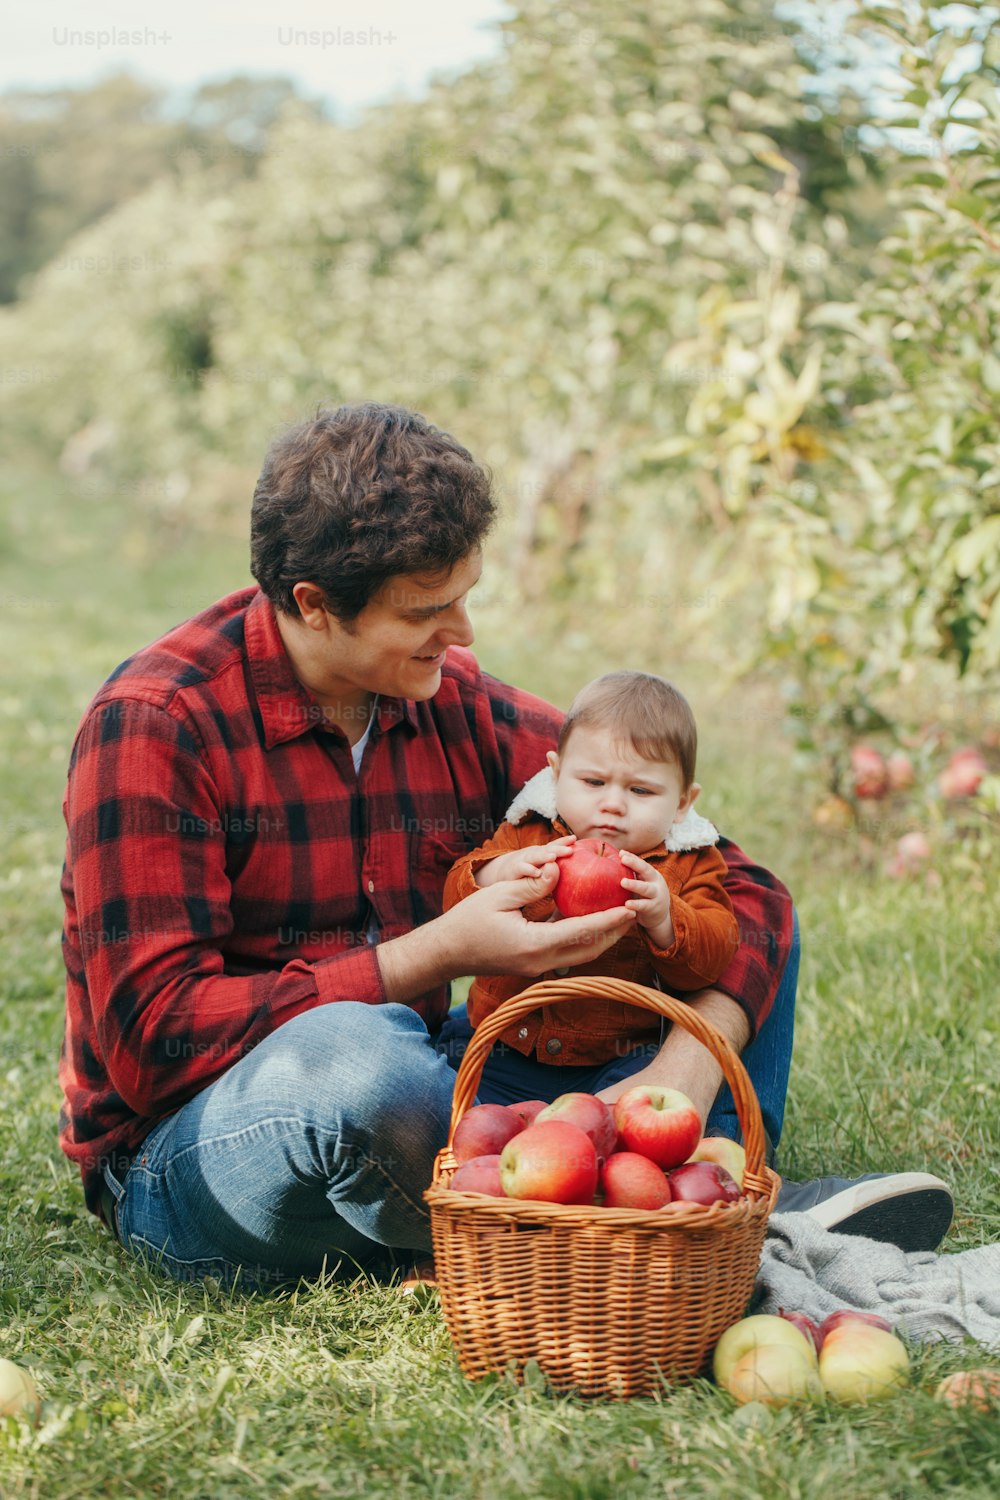 Happy father with baby boy on farm picking apples in wicker basket. Gathering of autumn fall harvest in orchard. Dad feeding son with healthy snack. Seasonal activity hobby.